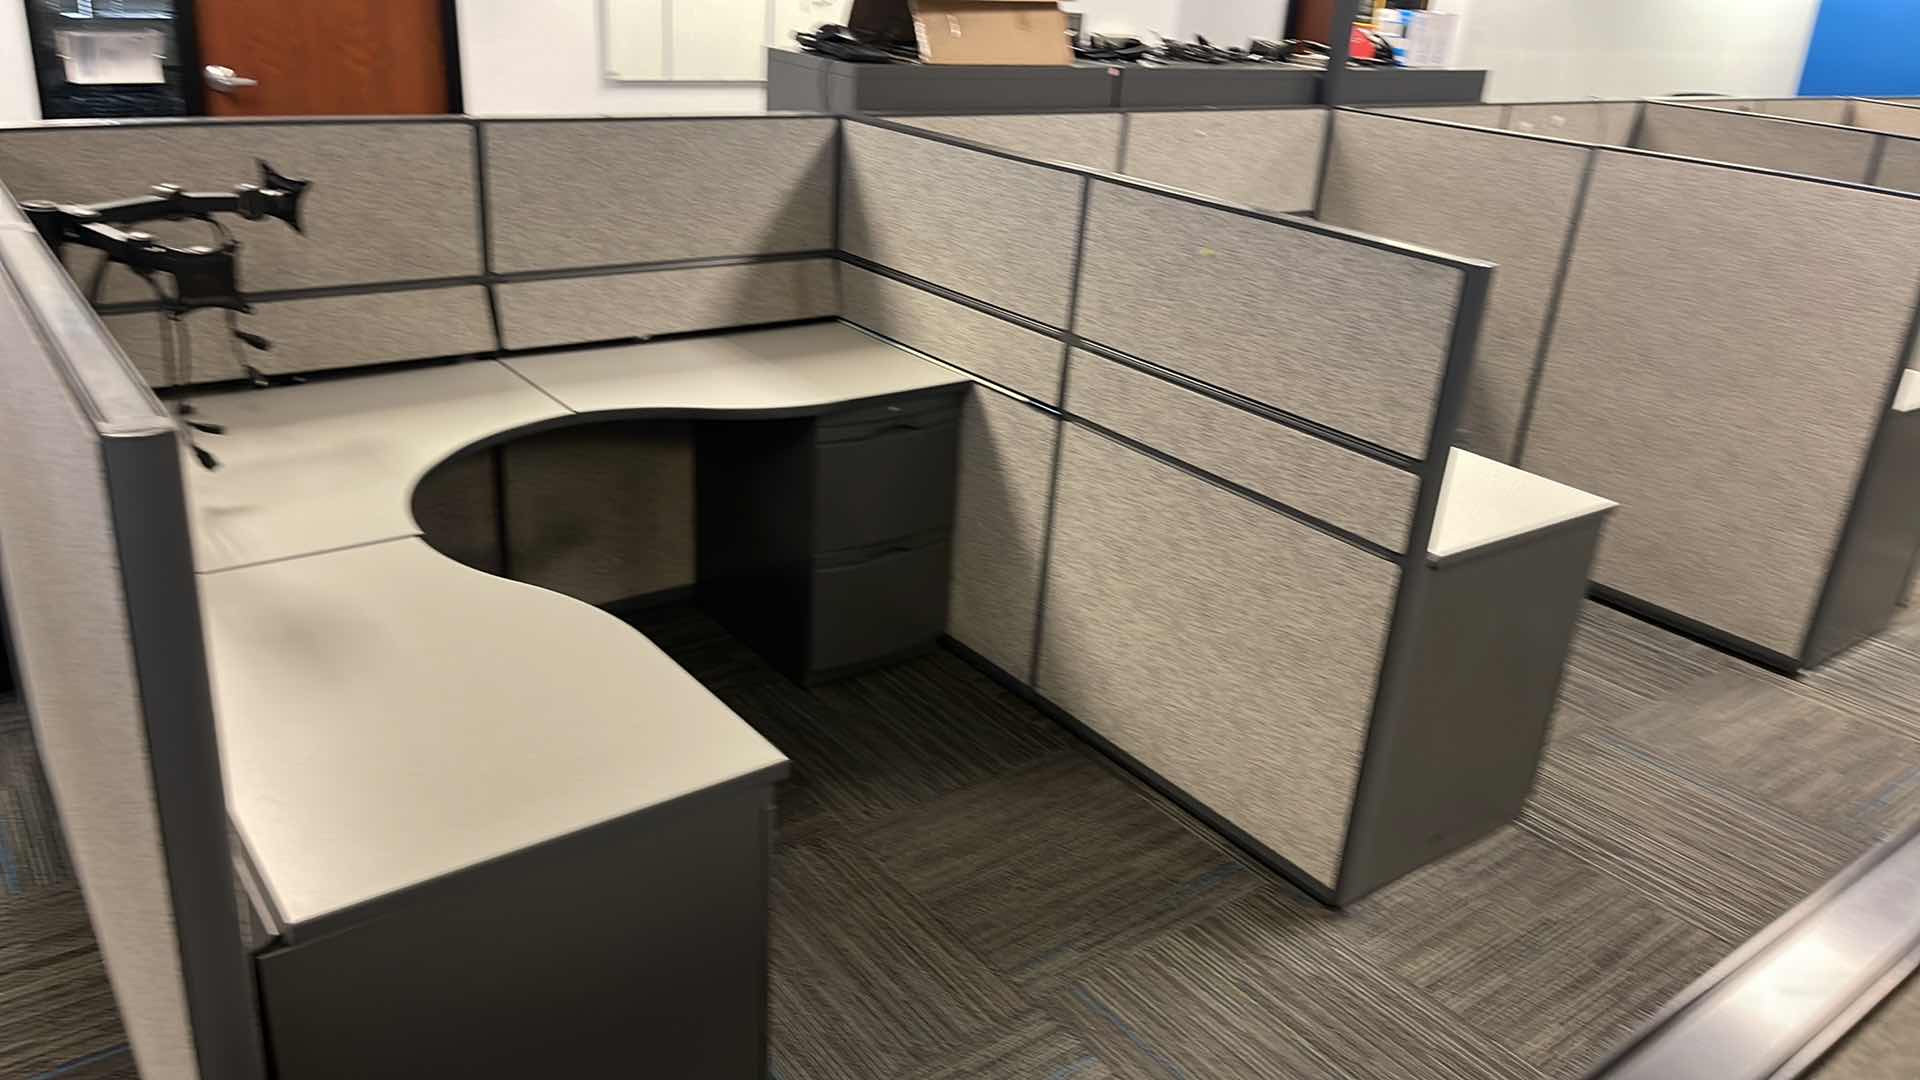 Photo 1 of 2 PC CUBICAL SET W 5 DRAWER MEDAL BASE DESKS 76” X 76” H50” (BUYER TO DISASSEMBLE & REMOVE FROM 2ND STORY OFFICE BUILDING W ELEVATOR)